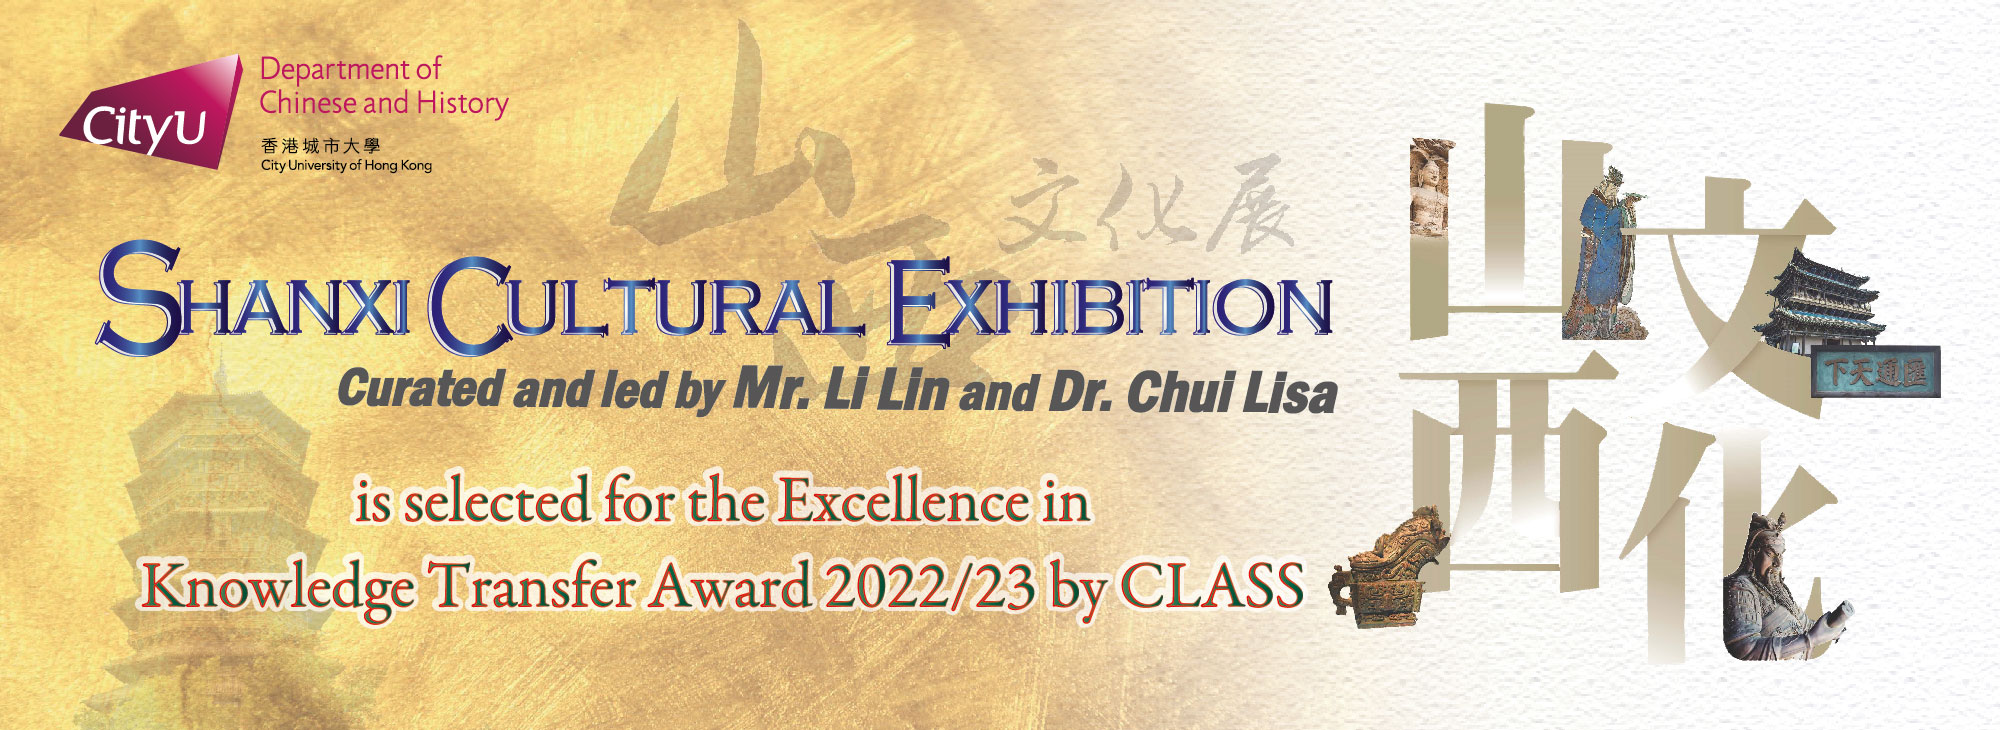 Shanxi Cultural Exhibition is selected for the Excellence in Knowledge Transfer Award 2022/23 by CLASS